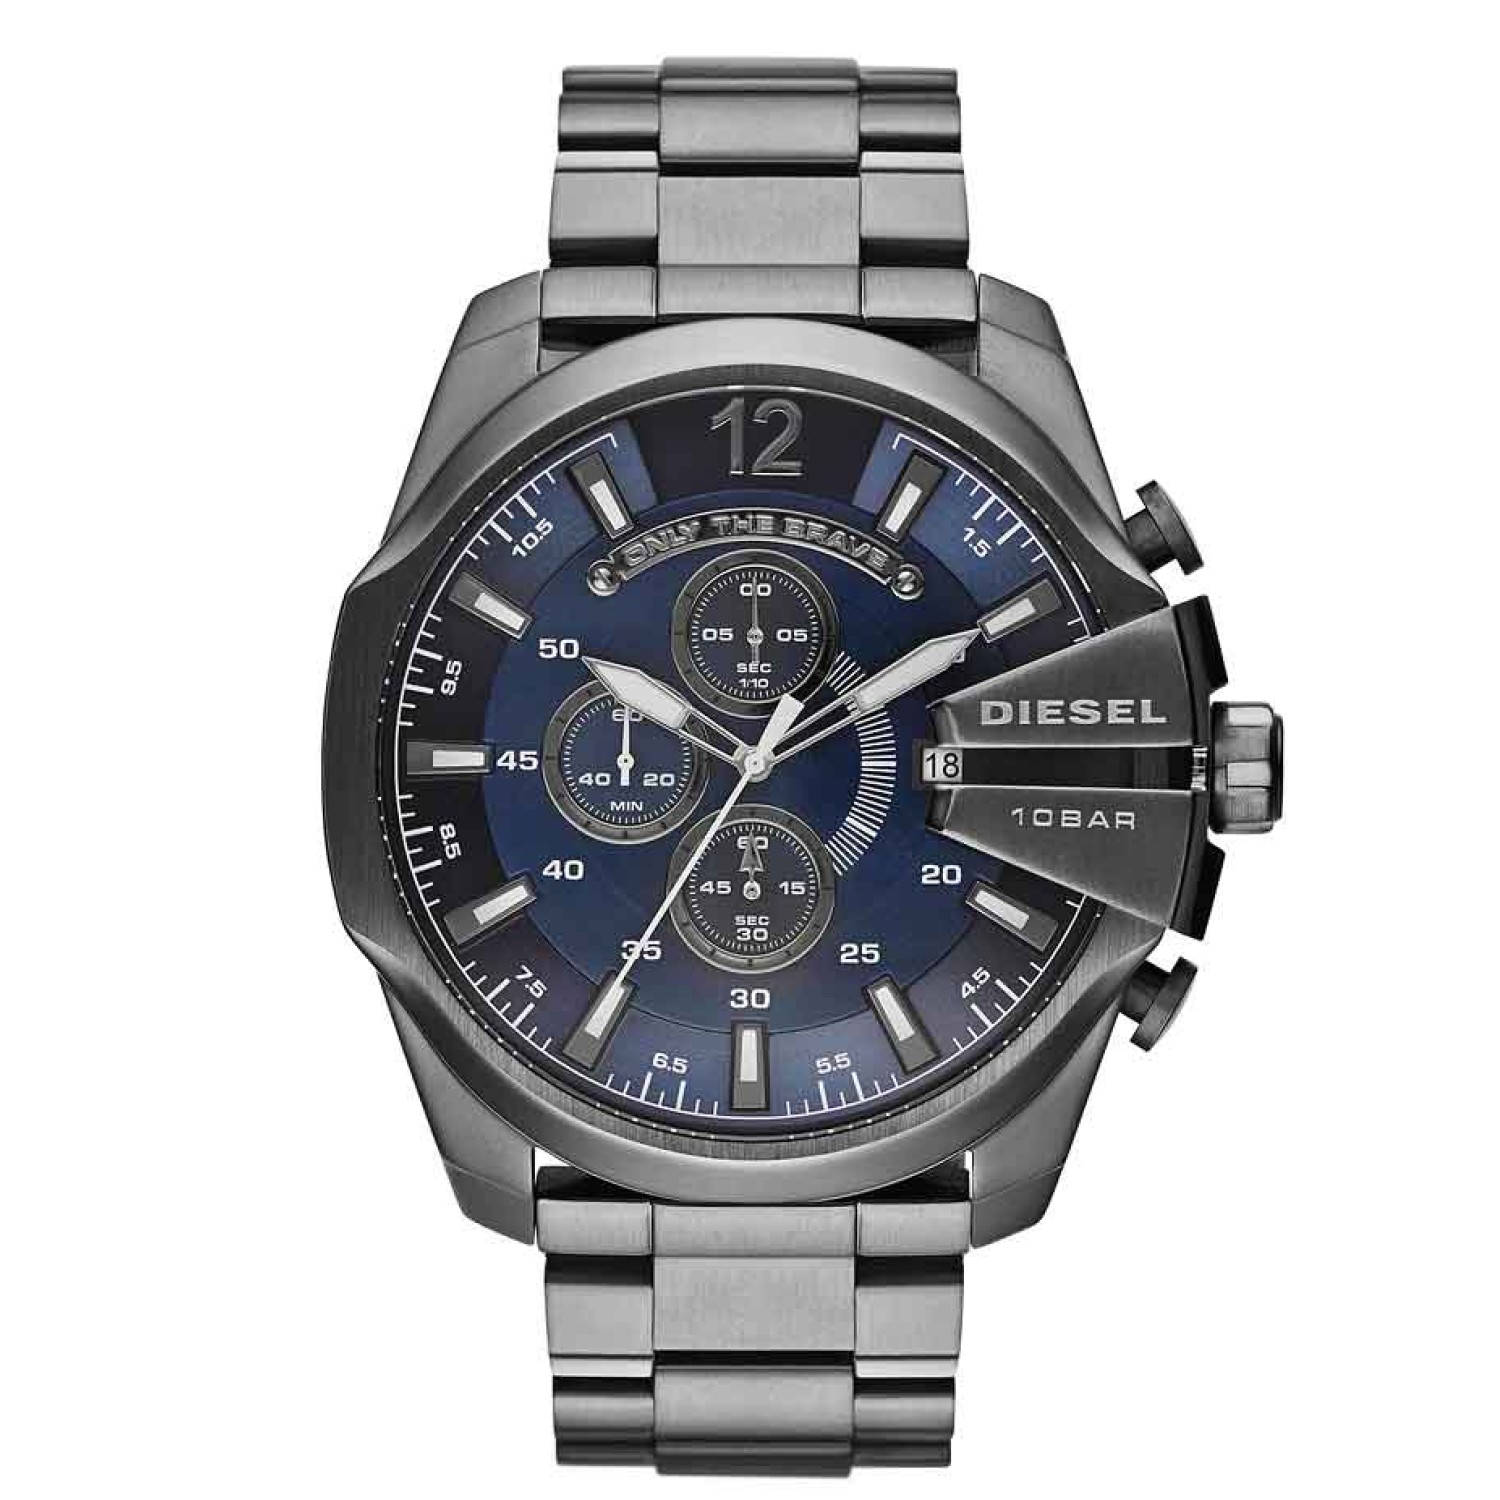 DZ4329 Diesel Master Chief Chronograph Watch. With gunmetal plating and a navy blue dial, this rendition of Mega Chief is as sleek and bold as it is flawlessly minimal. OXIPAY - Have it now and pay over 4 fortnightly payments - Interest free 3 Months No P